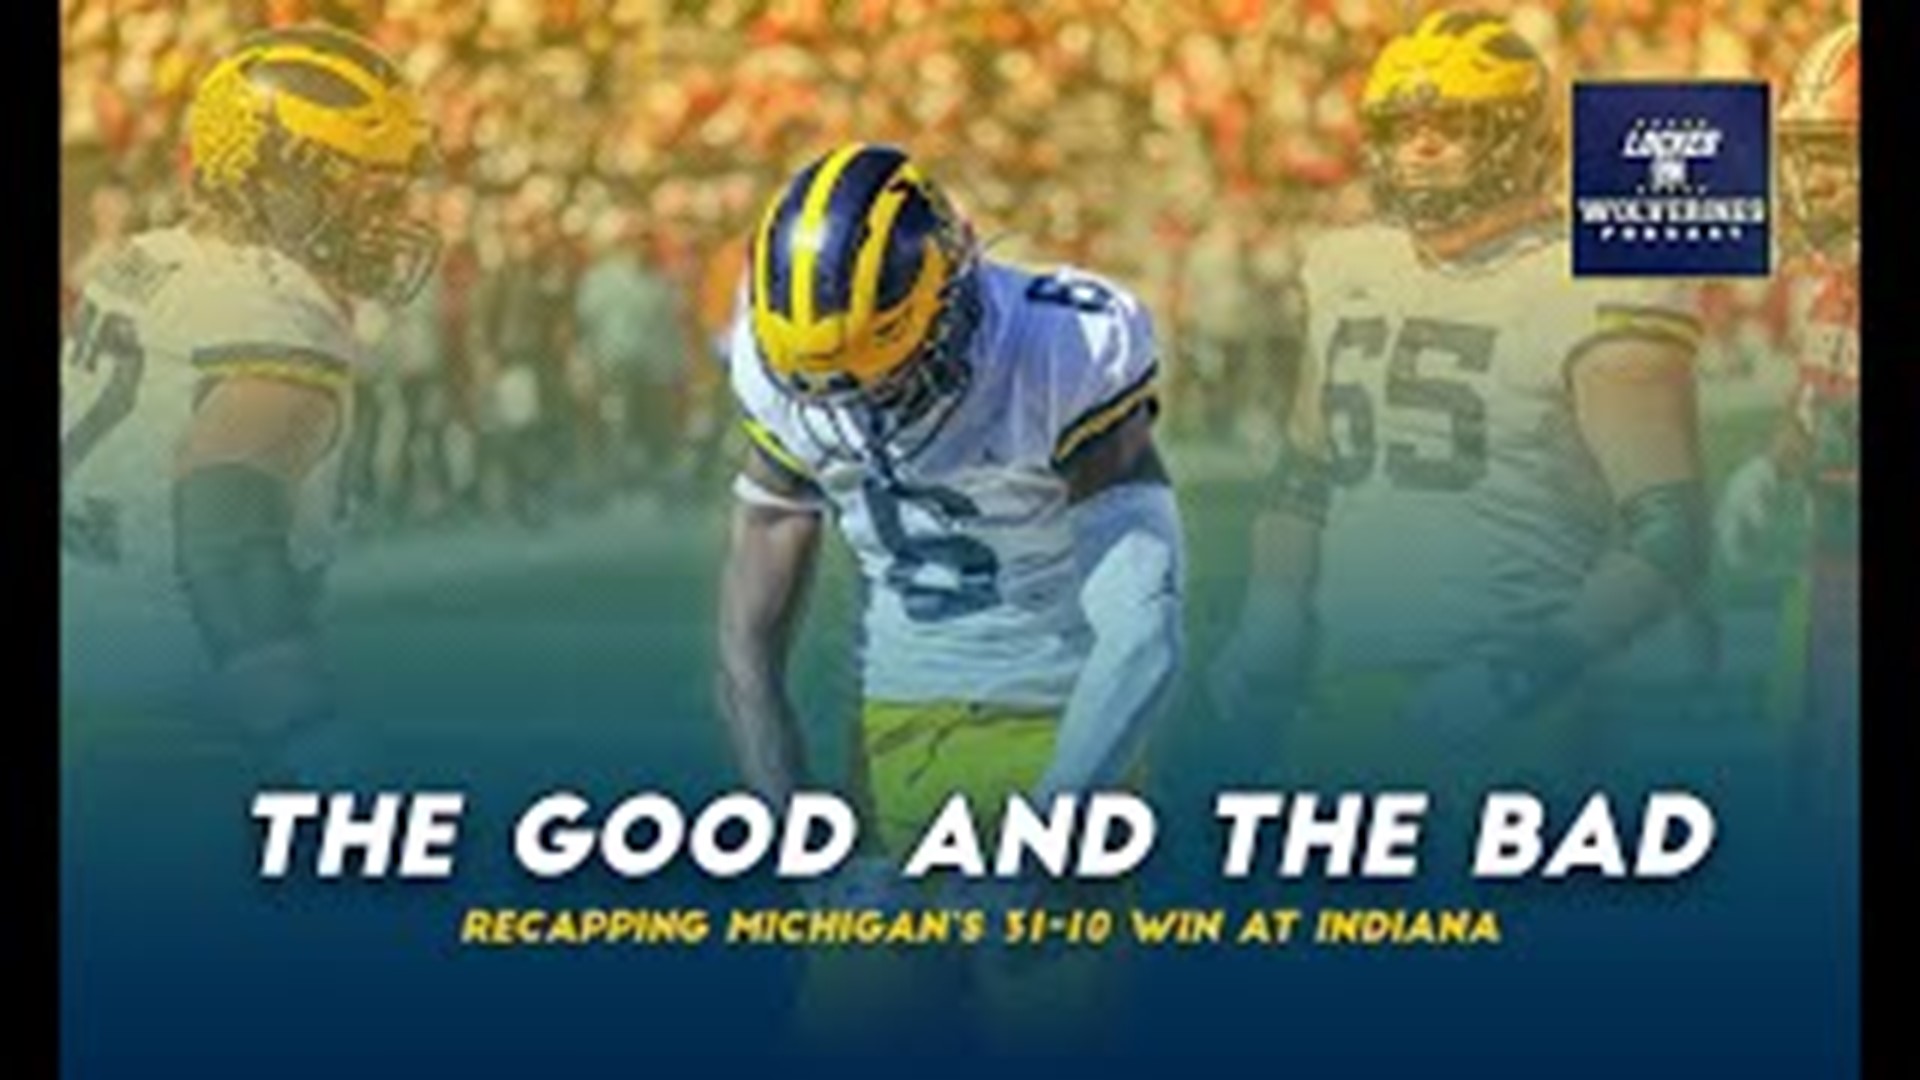 Breaking down Michigan football's win over Indiana, while looking ahead to Penn State. Looking at the Mike Hart of it all and a recap of the game.